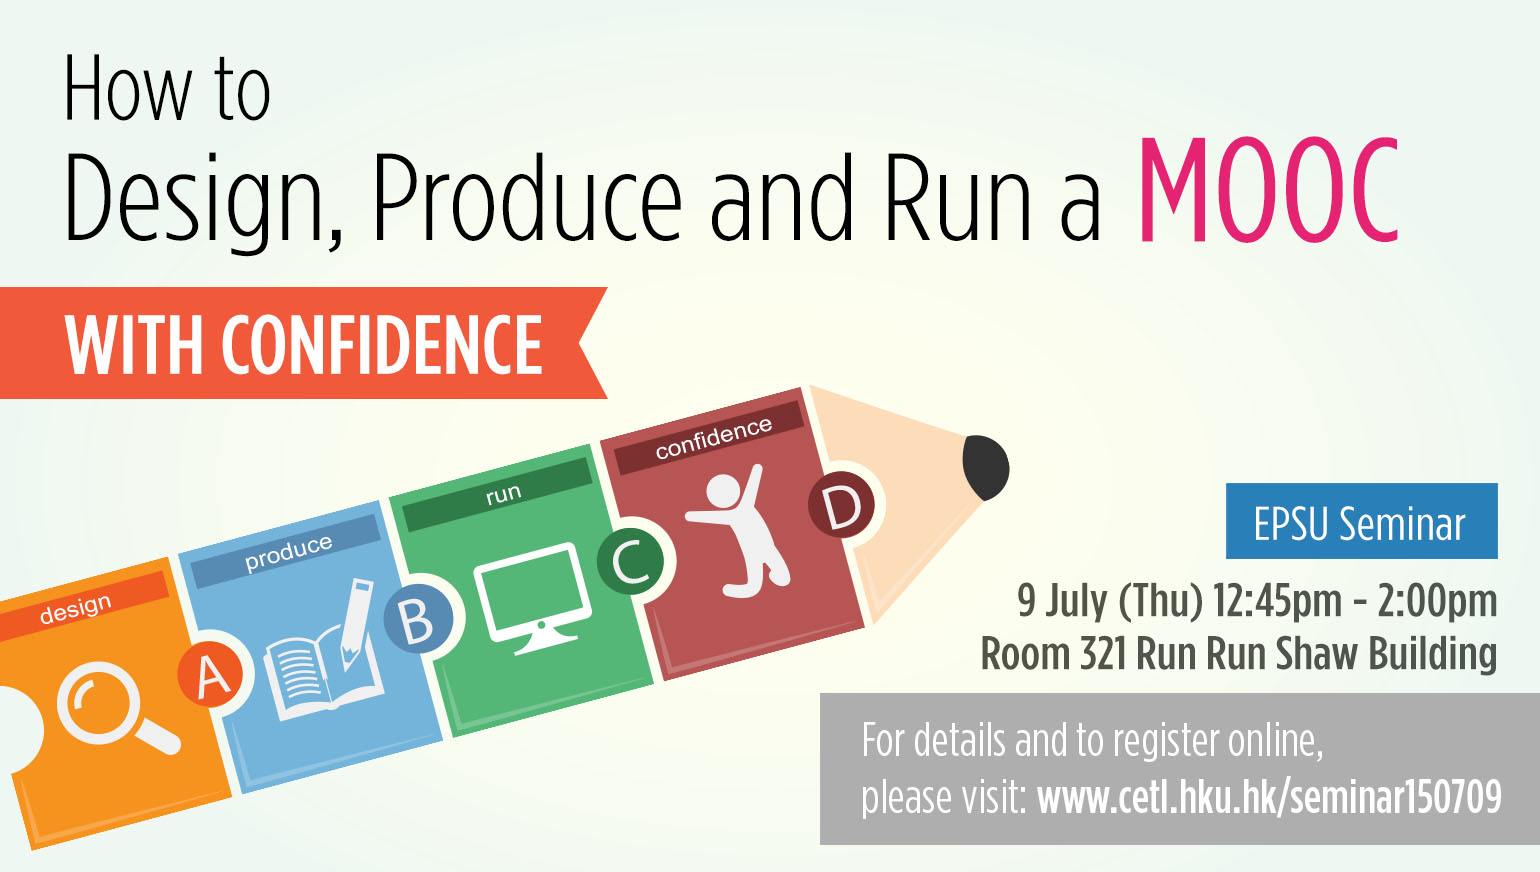 How to Design, Produce and Run a MOOC with Confidence